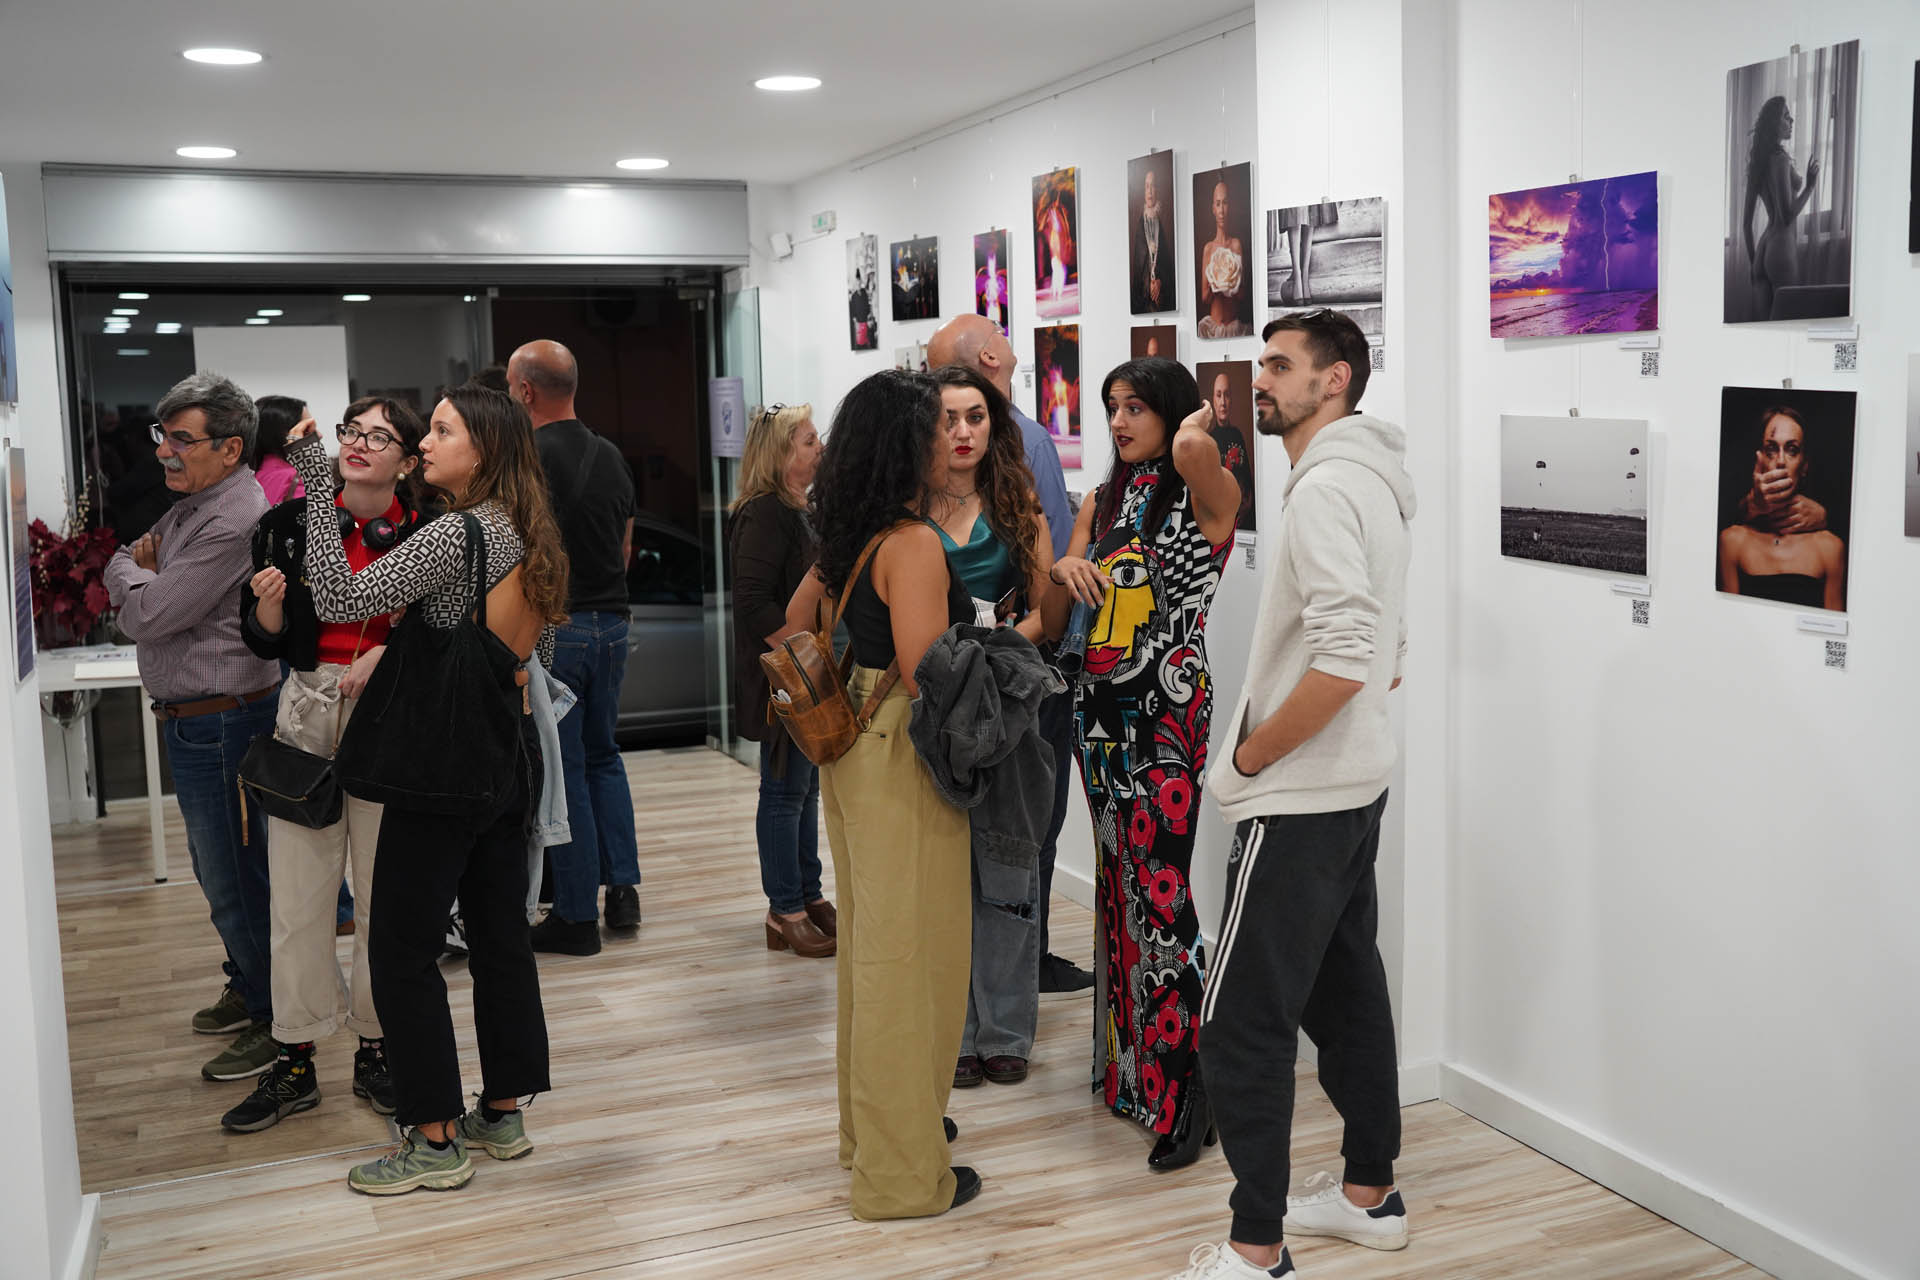 The Art of Social Media 2023 exhibition in Athens